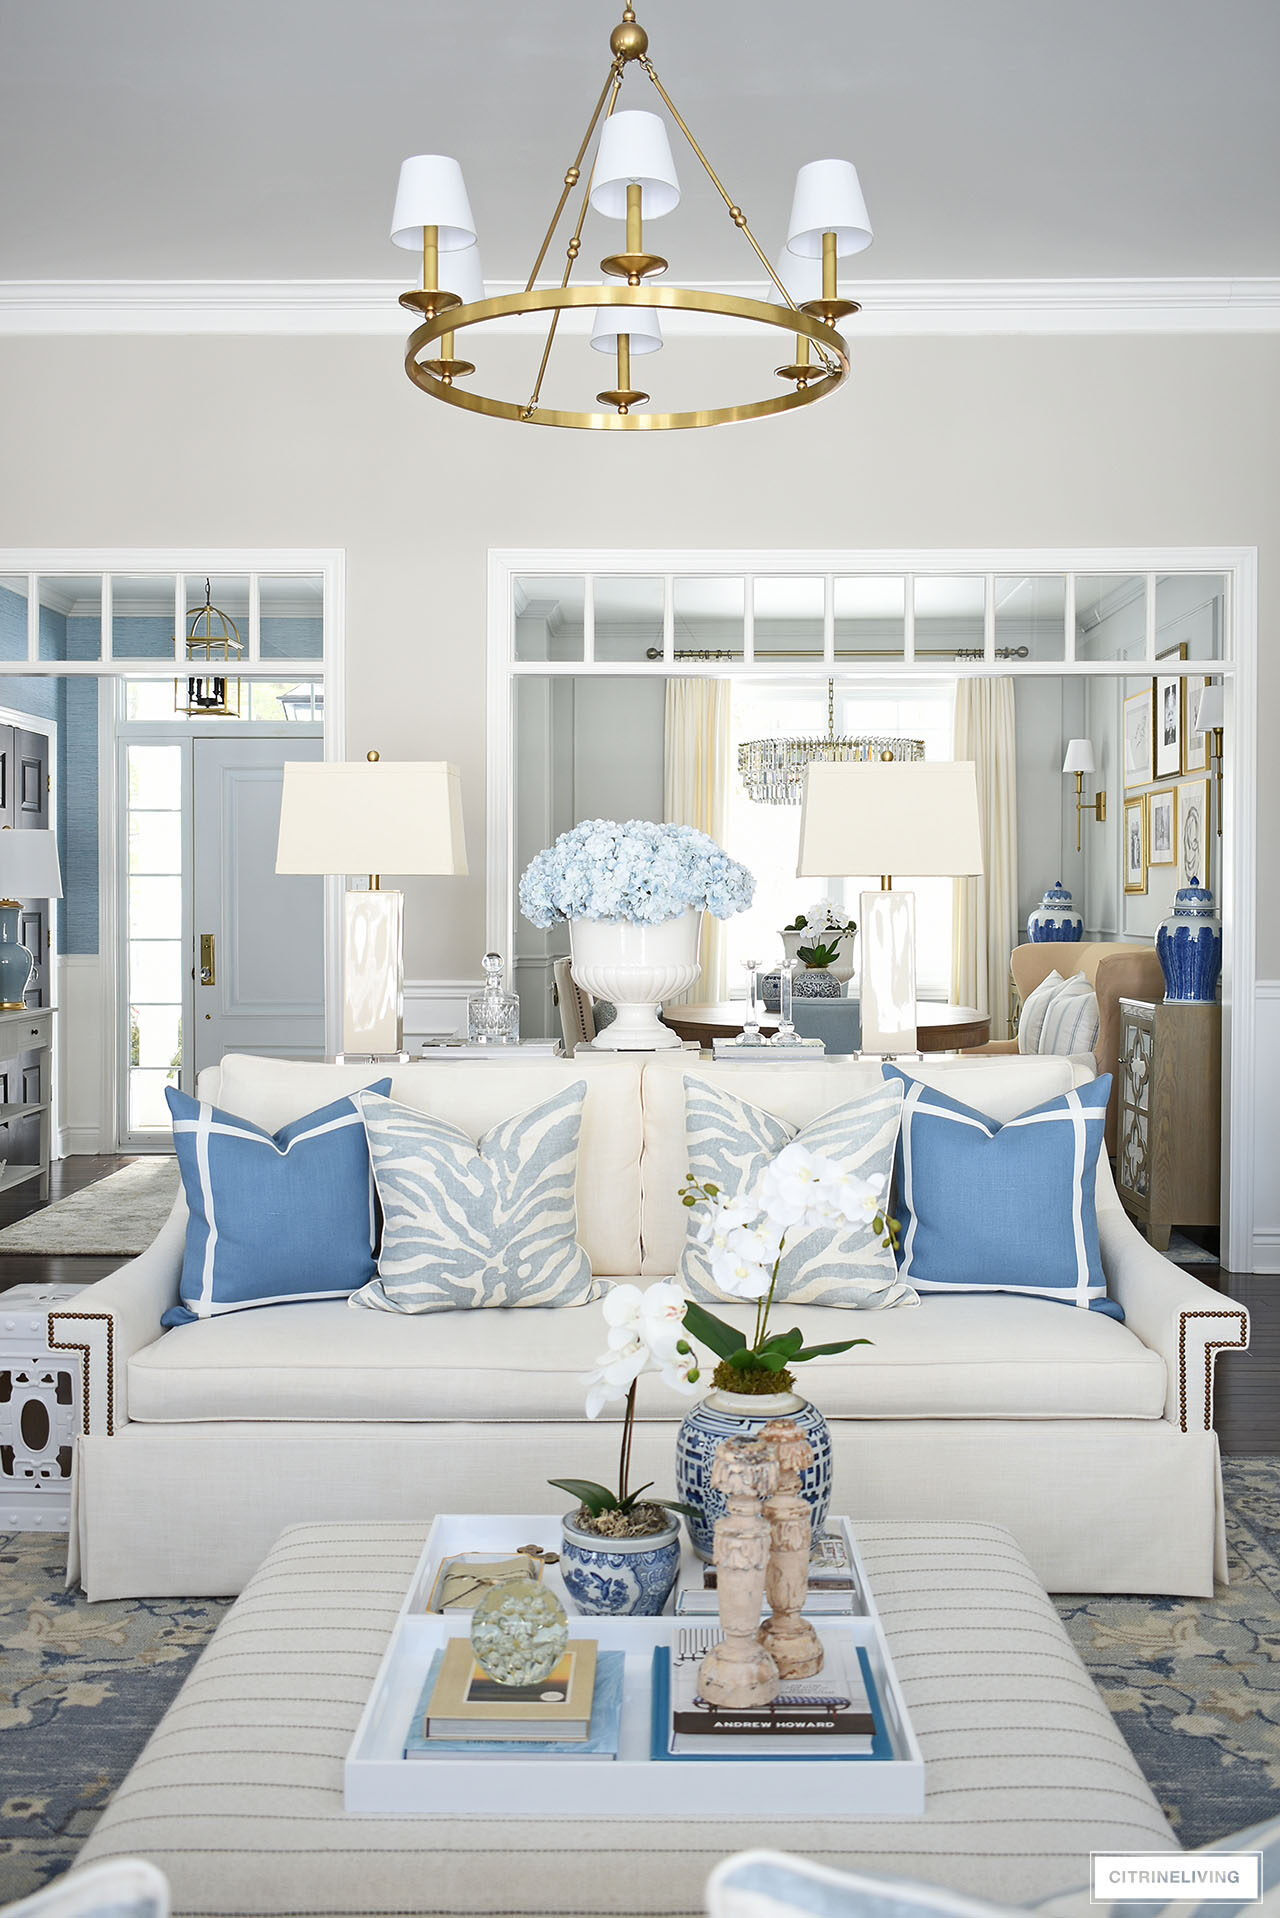 Living room decorated for spring with blue and white pillows - a muted zebra print and a vibrant solid blue with white topstitch ribbon detailing.